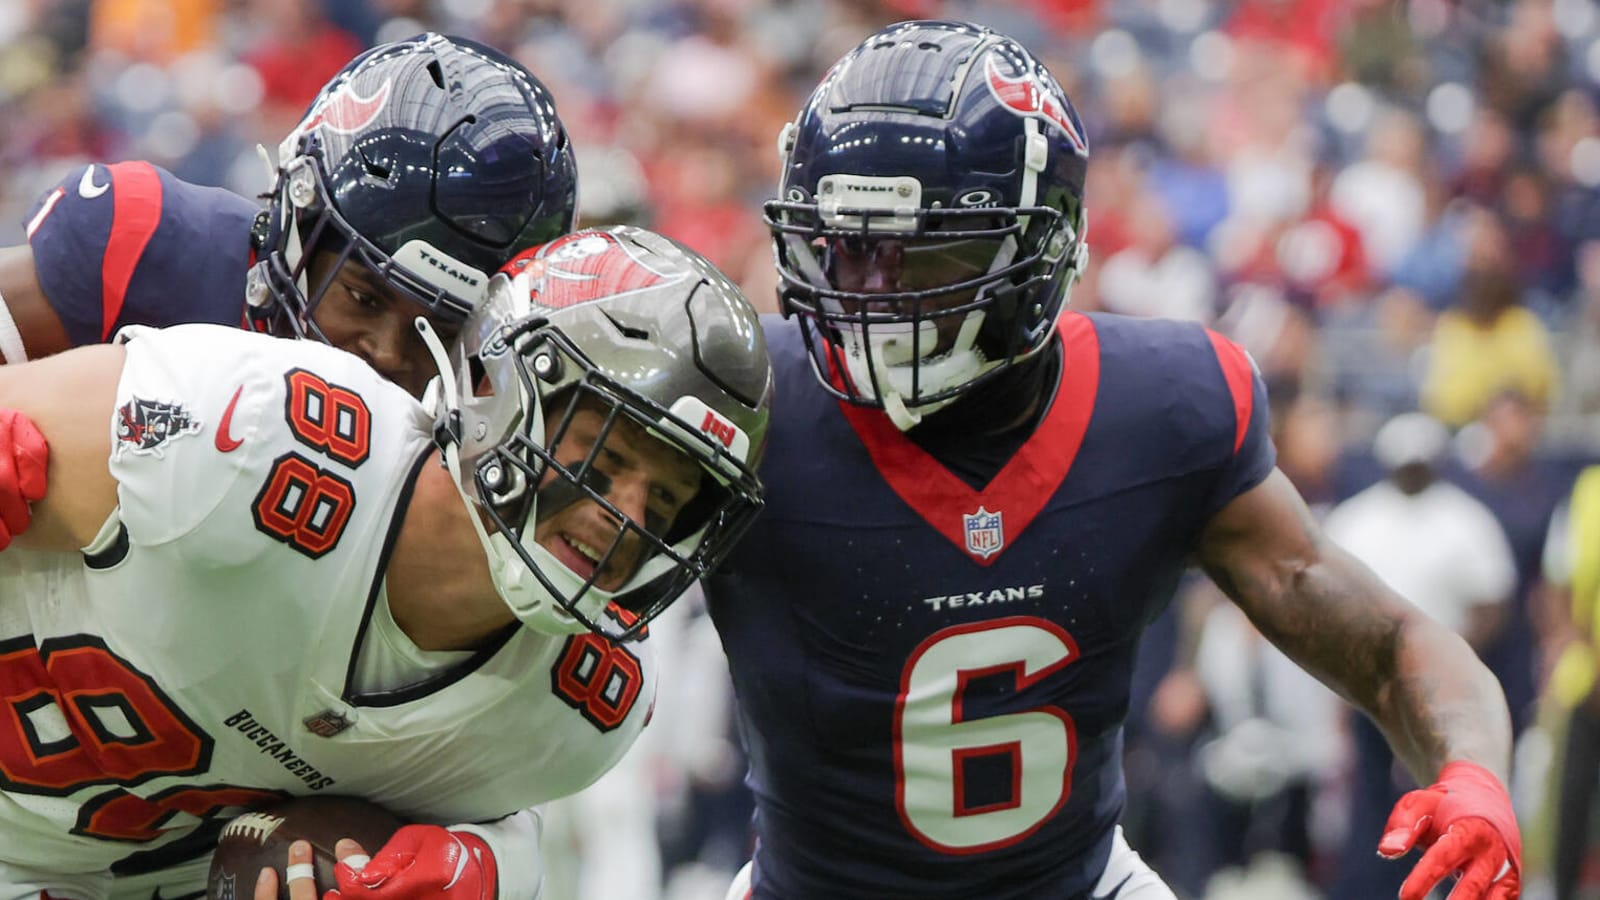 Texans LB suspended for violating player safety rules